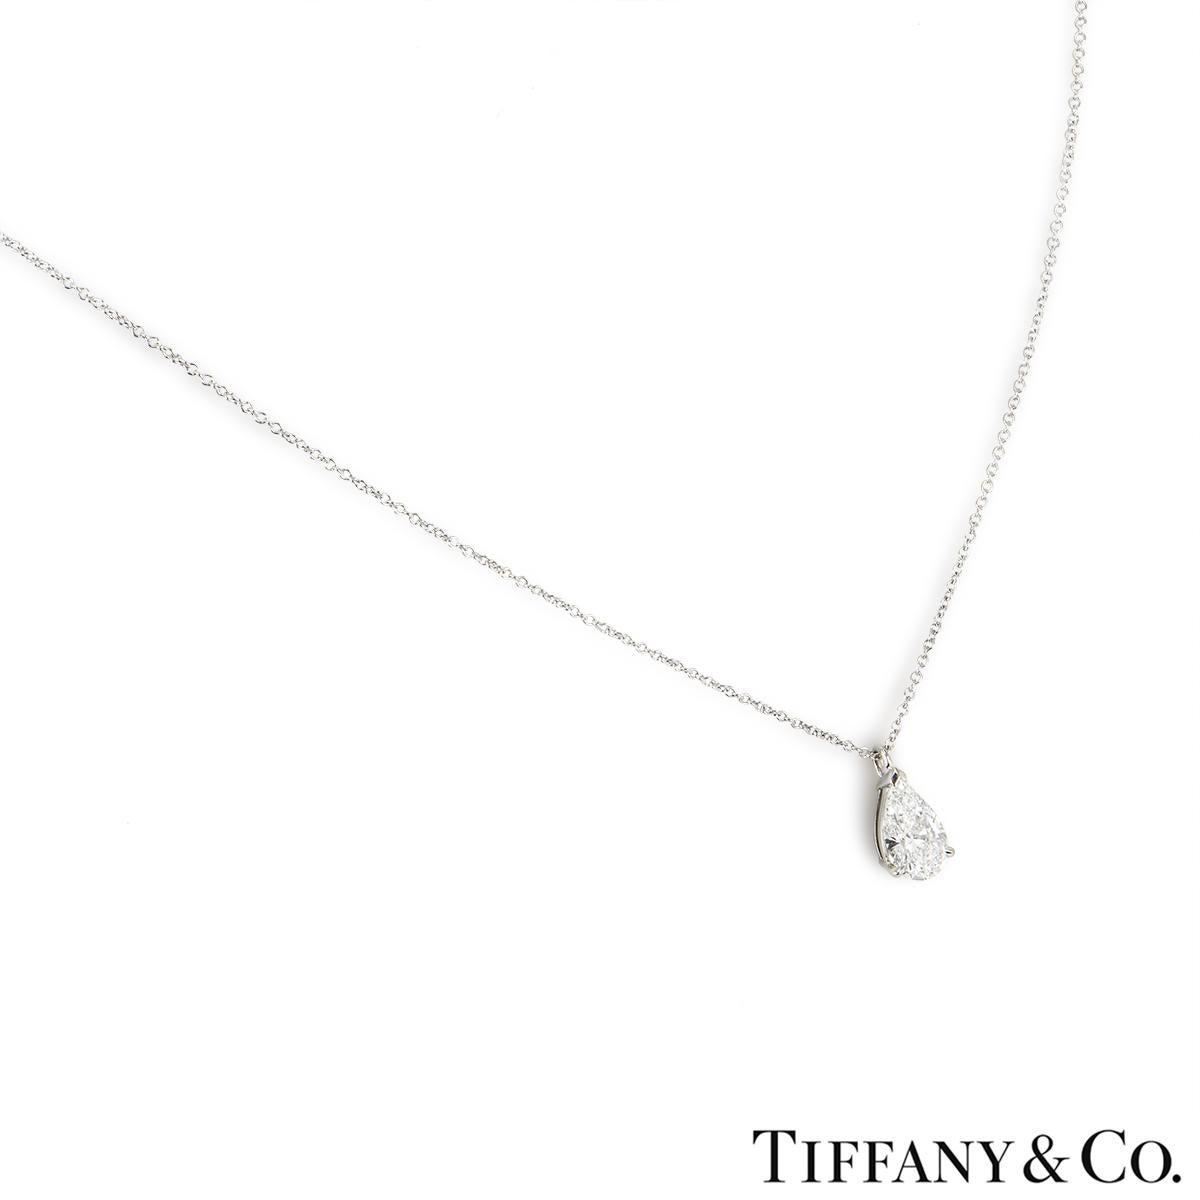 A stunning Tiffany & Co. platinum diamond pendant. The pendant features a single pear cut diamond in a 3 claw setting with a weight of 1.28ct, I colour and VVS2 clarity. The pendant features an 18-inch cable chain with a lobster clasp and a gross